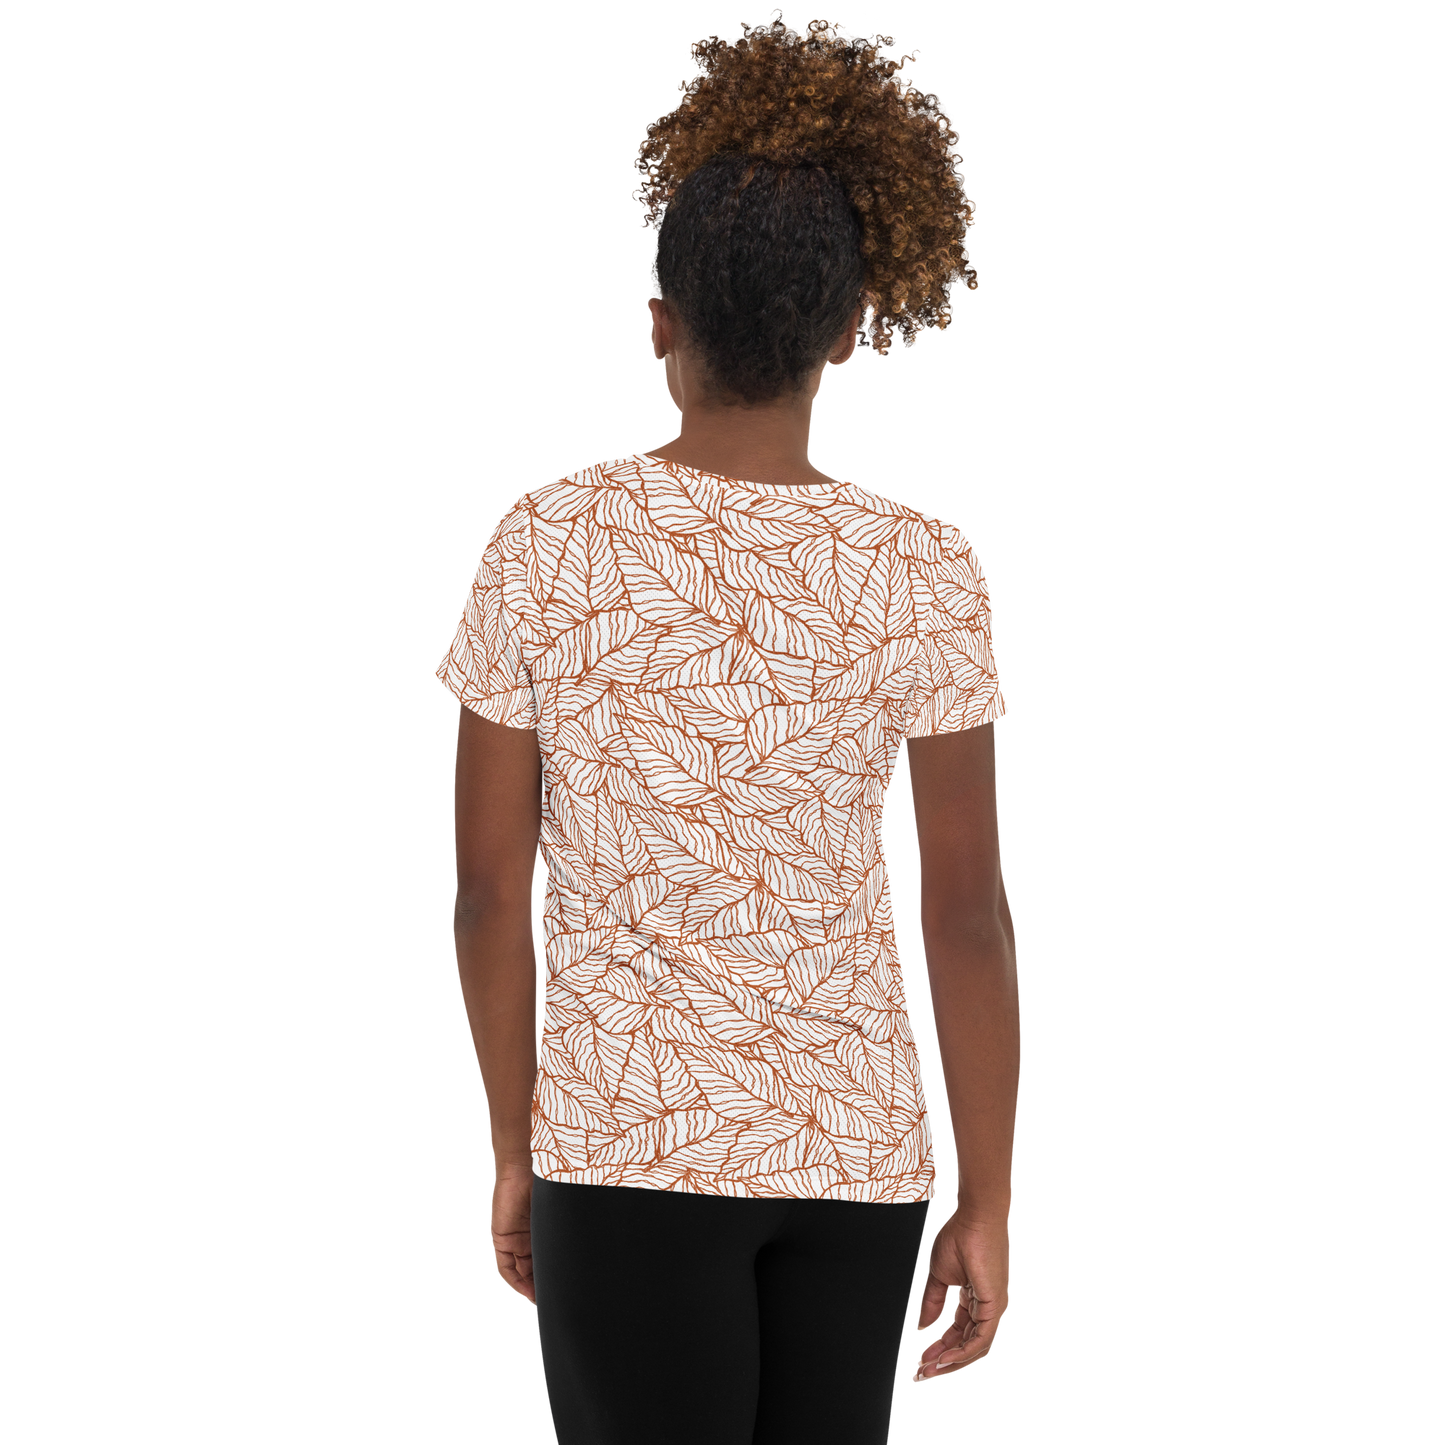 Colorful Fall Leaves | Seamless Patterns | All-Over Print Women's Athletic T-Shirt - #1